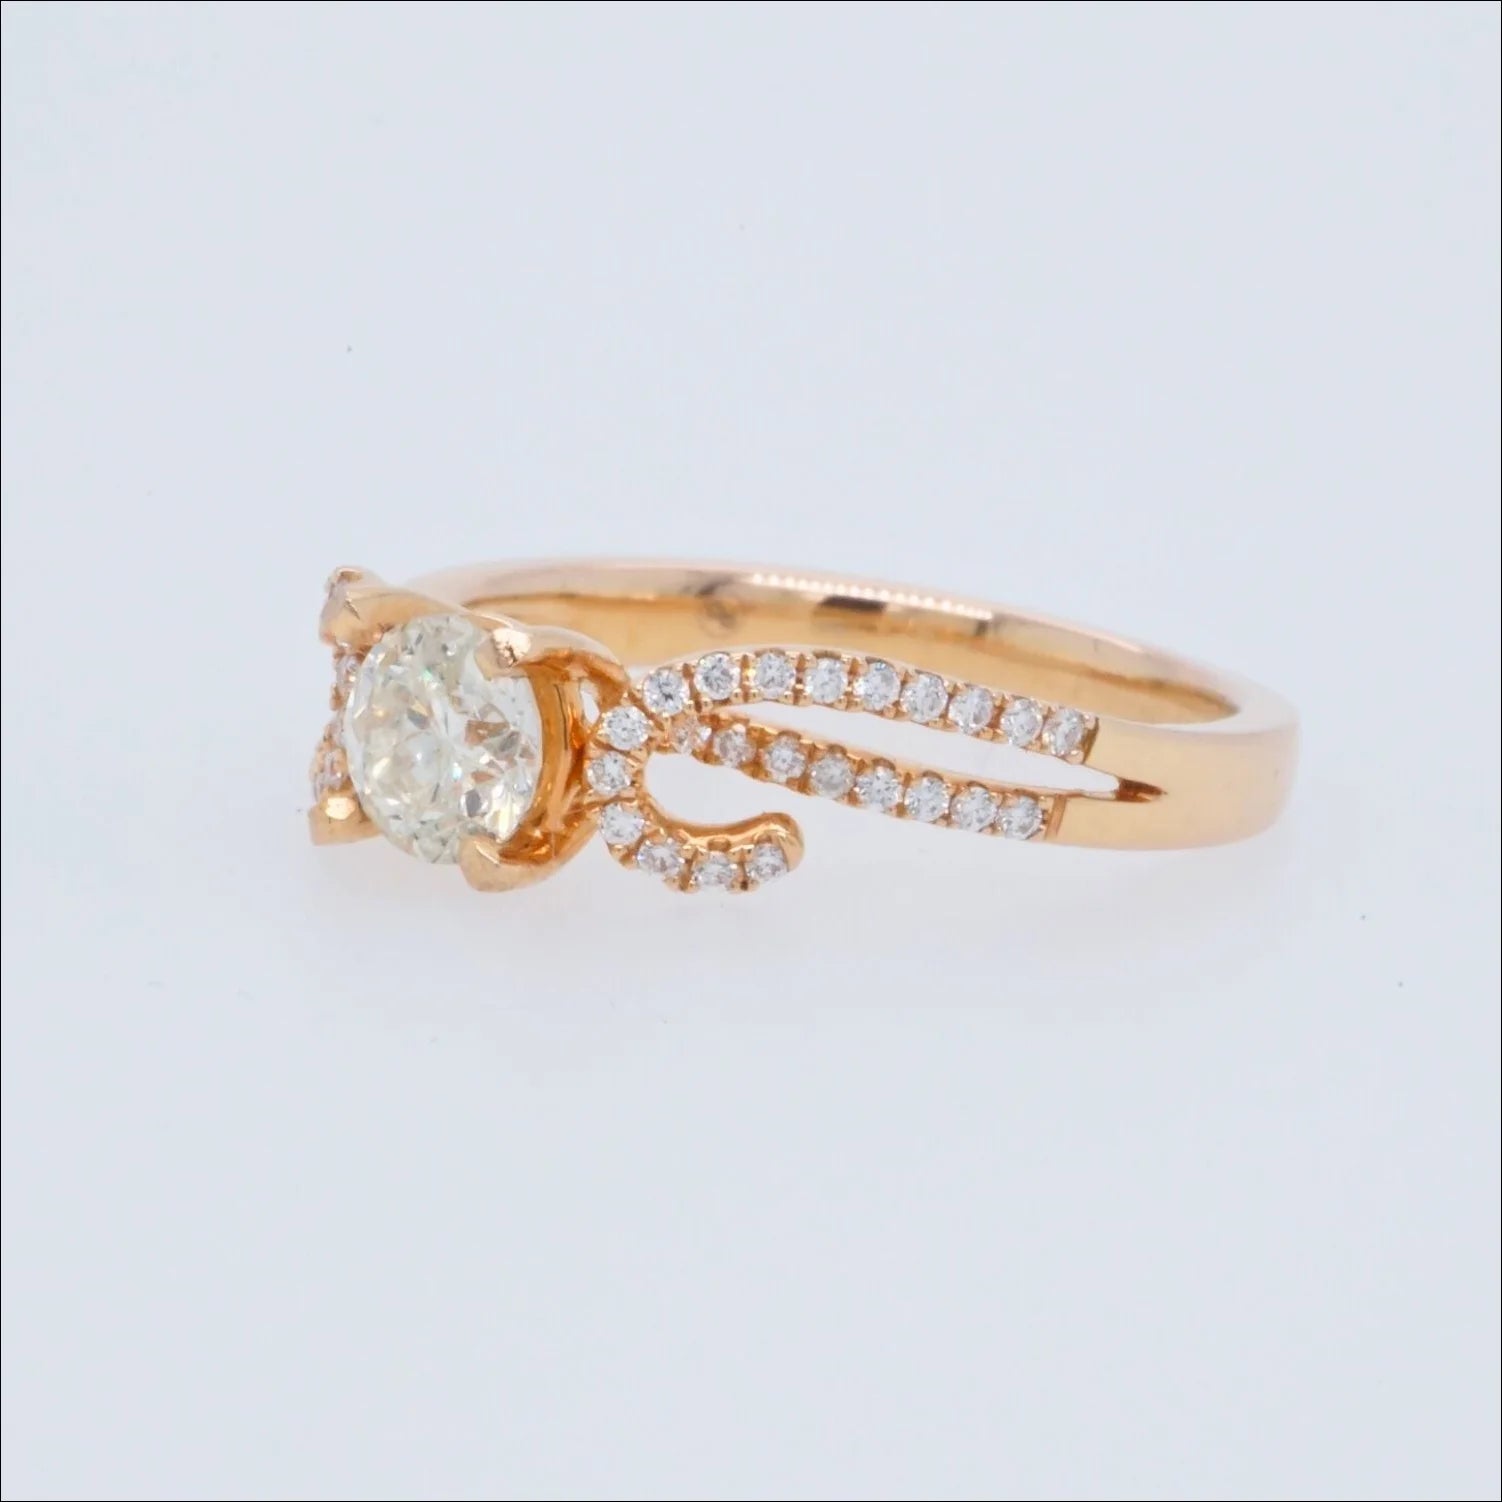 ’Romantic 18k Rose Gold Diamond Ring’ | Home page